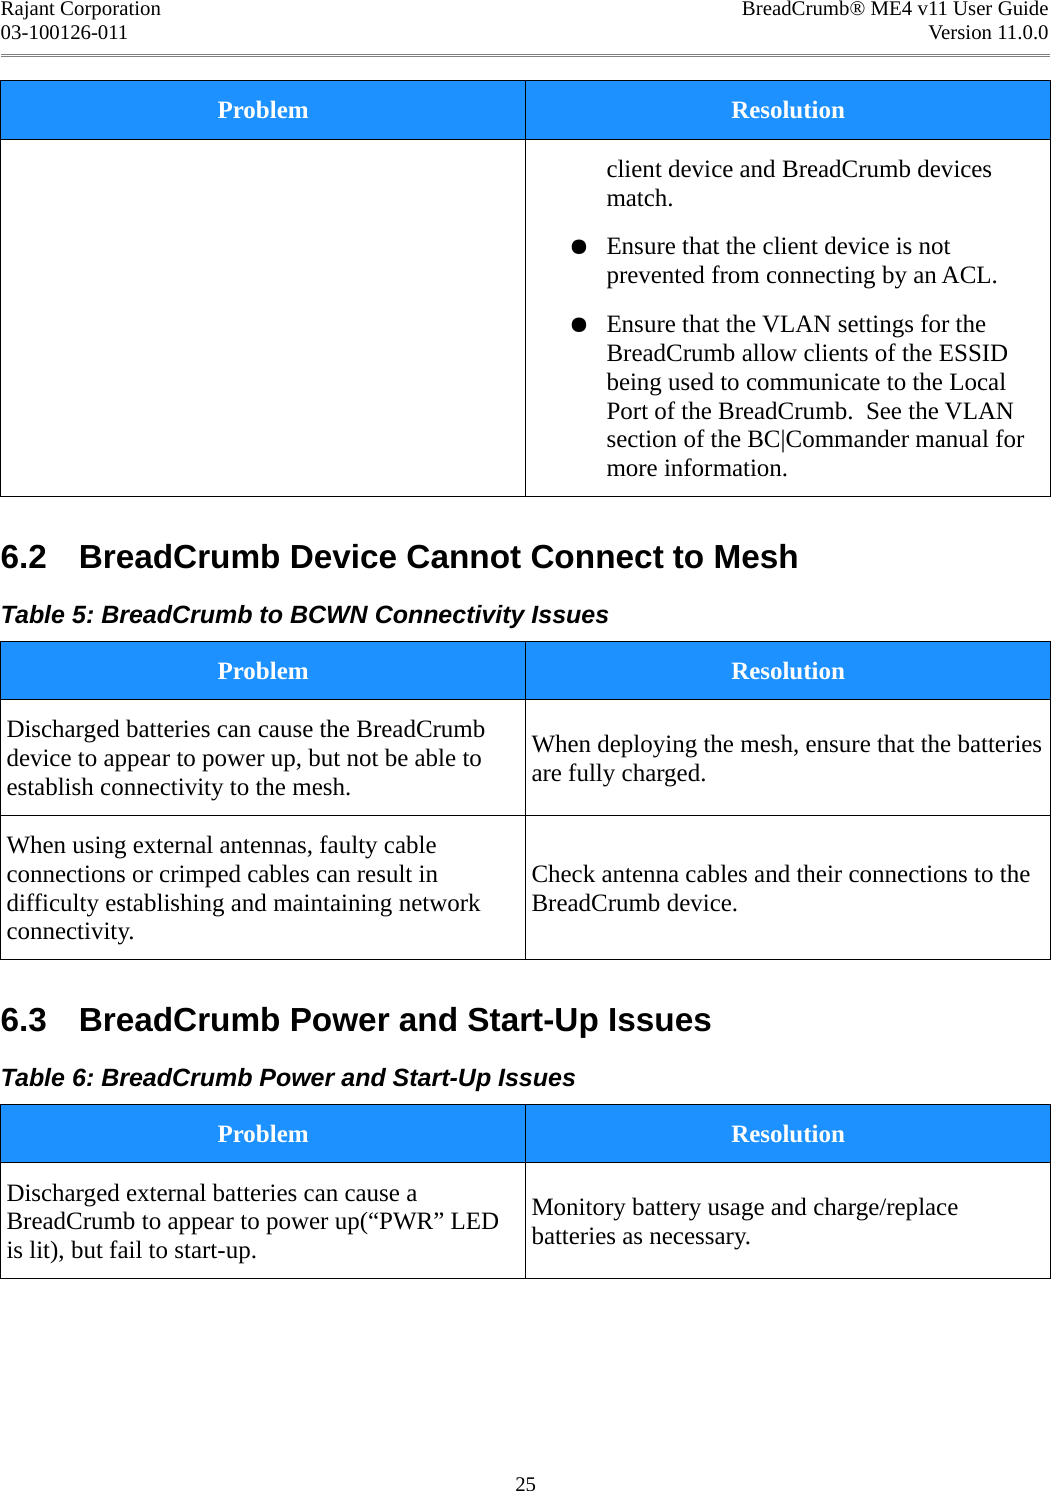 Rajant Corporation BreadCrumb® ME4 v11 User Guide03-100126-011 Version 11.0.0Problem Resolutionclient device and BreadCrumb devices match.●Ensure that the client device is not prevented from connecting by an ACL.●Ensure that the VLAN settings for the BreadCrumb allow clients of the ESSID being used to communicate to the Local Port of the BreadCrumb.  See the VLAN section of the BC|Commander manual for more information.6.2  BreadCrumb Device Cannot Connect to MeshTable 5: BreadCrumb to BCWN Connectivity IssuesProblem ResolutionDischarged batteries can cause the BreadCrumb device to appear to power up, but not be able to establish connectivity to the mesh.When deploying the mesh, ensure that the batteries are fully charged.When using external antennas, faulty cable connections or crimped cables can result in difficulty establishing and maintaining network connectivity.Check antenna cables and their connections to the BreadCrumb device.6.3  BreadCrumb Power and Start-Up IssuesTable 6: BreadCrumb Power and Start-Up IssuesProblem ResolutionDischarged external batteries can cause a BreadCrumb to appear to power up(“PWR” LED is lit), but fail to start-up.Monitory battery usage and charge/replace batteries as necessary.25